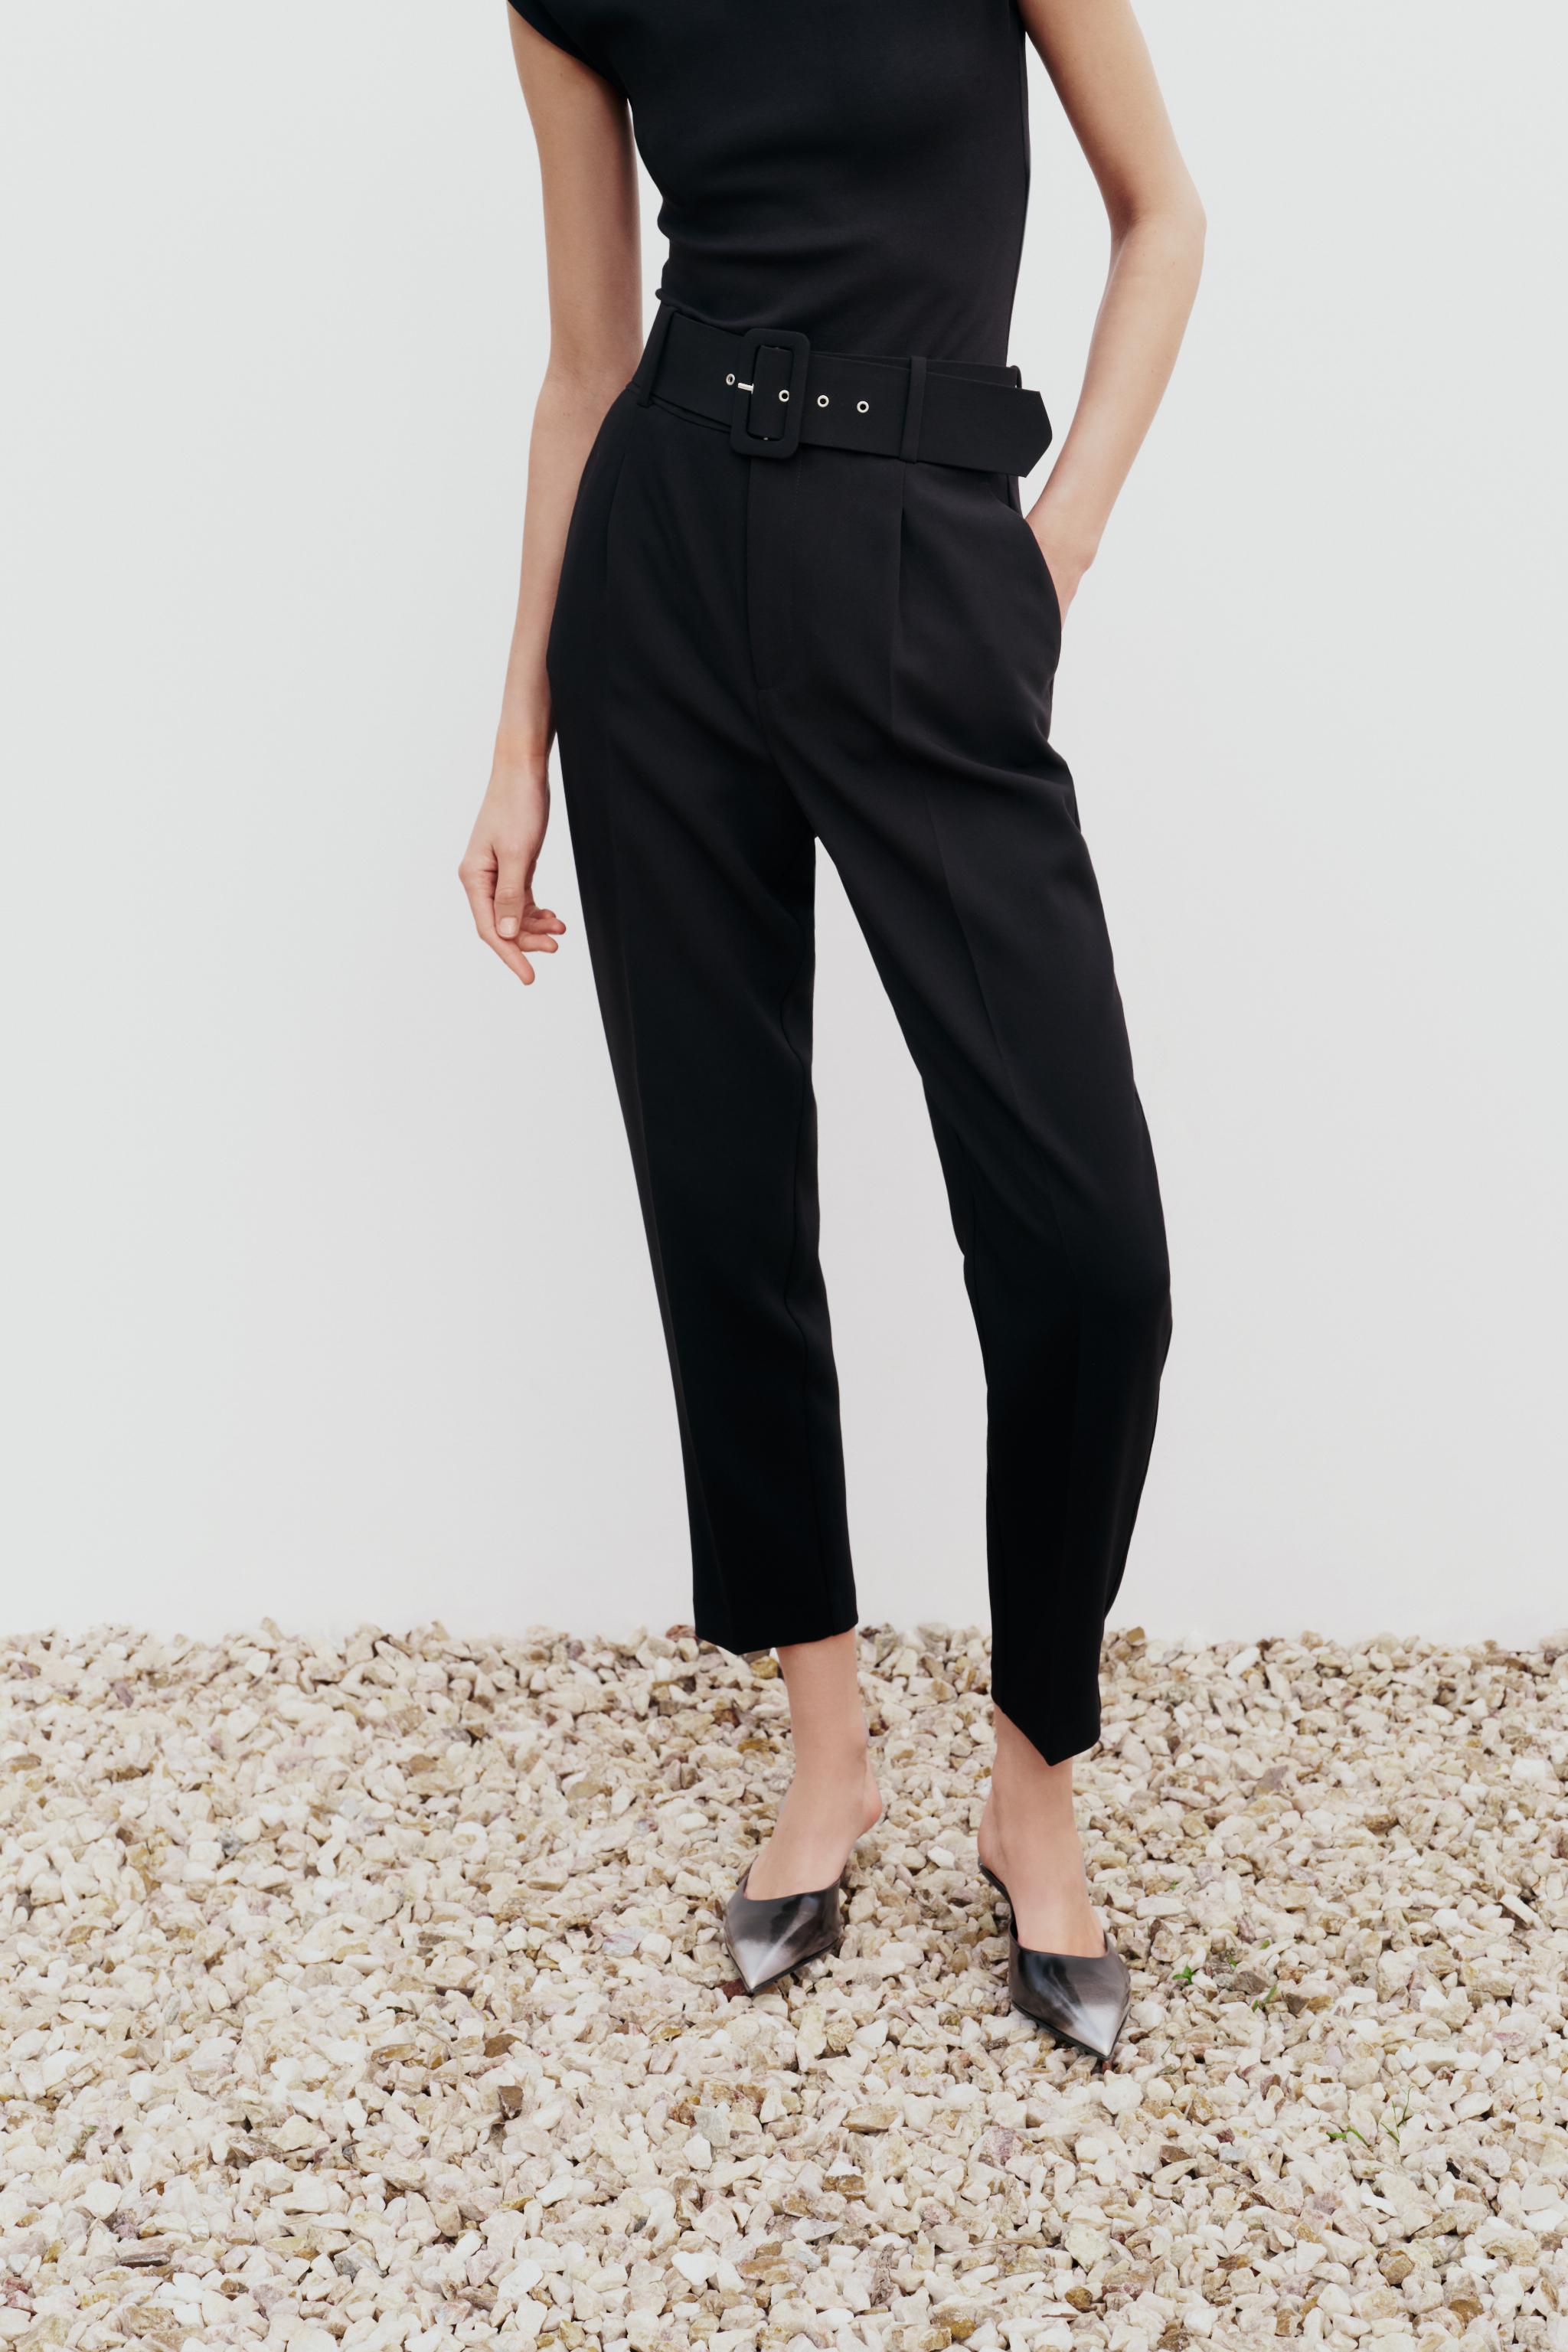 NWT ZARA WOMEN'S BELTED HIGH-WAISTED PANTS BLACK SIZE S M L REF  4387/340/800